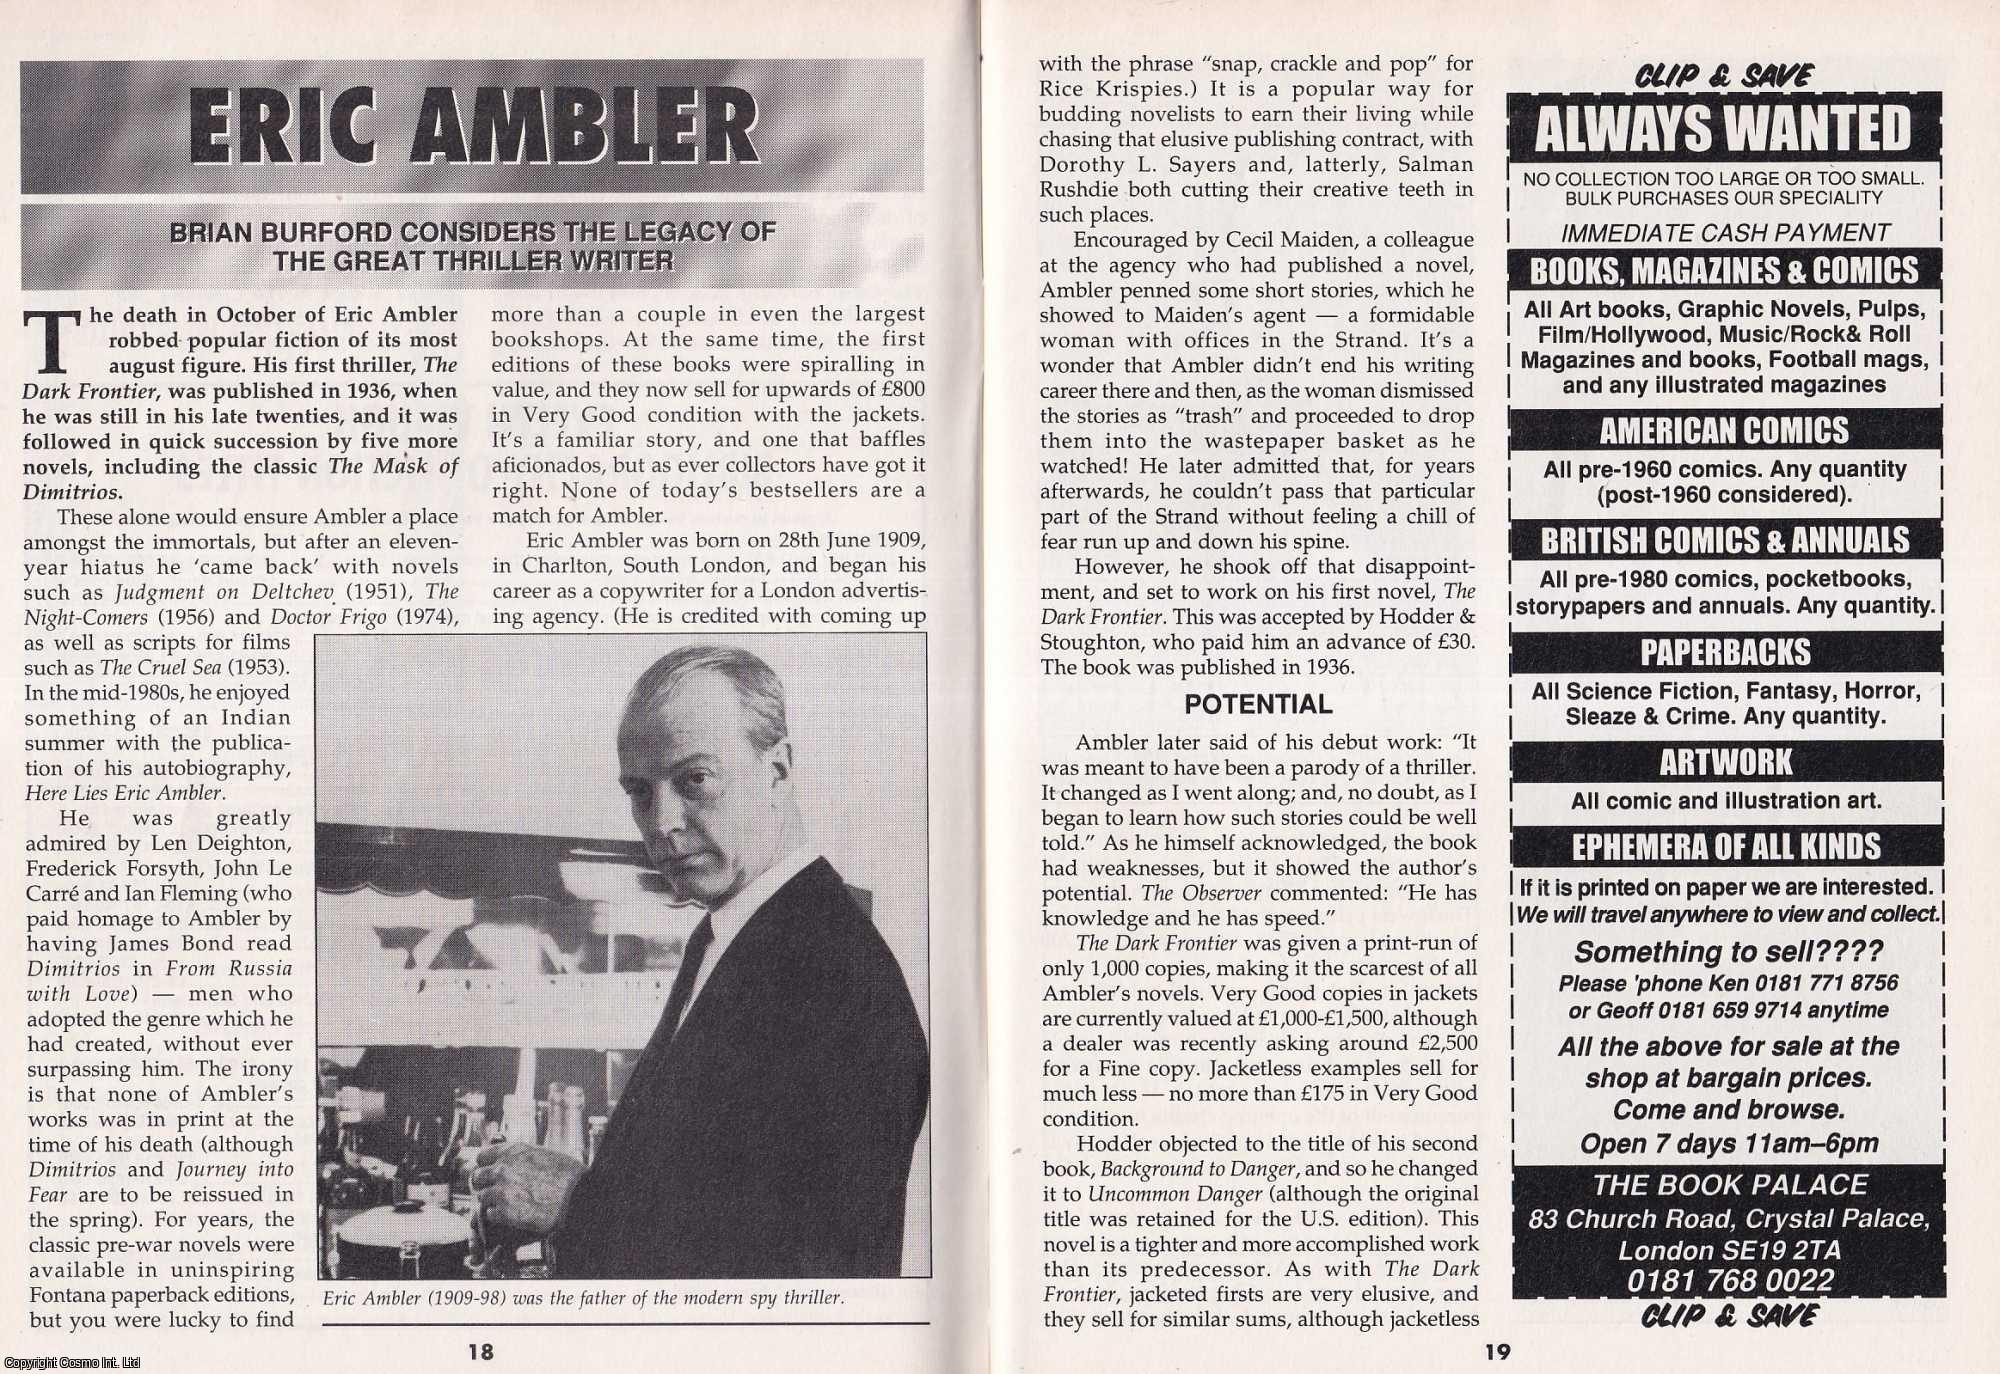 Brian Burford - Eric Ambler. Considering The Legacy of The Great Thriller Writer. This is an original article separated from an issue of The Book & Magazine Collector publication.